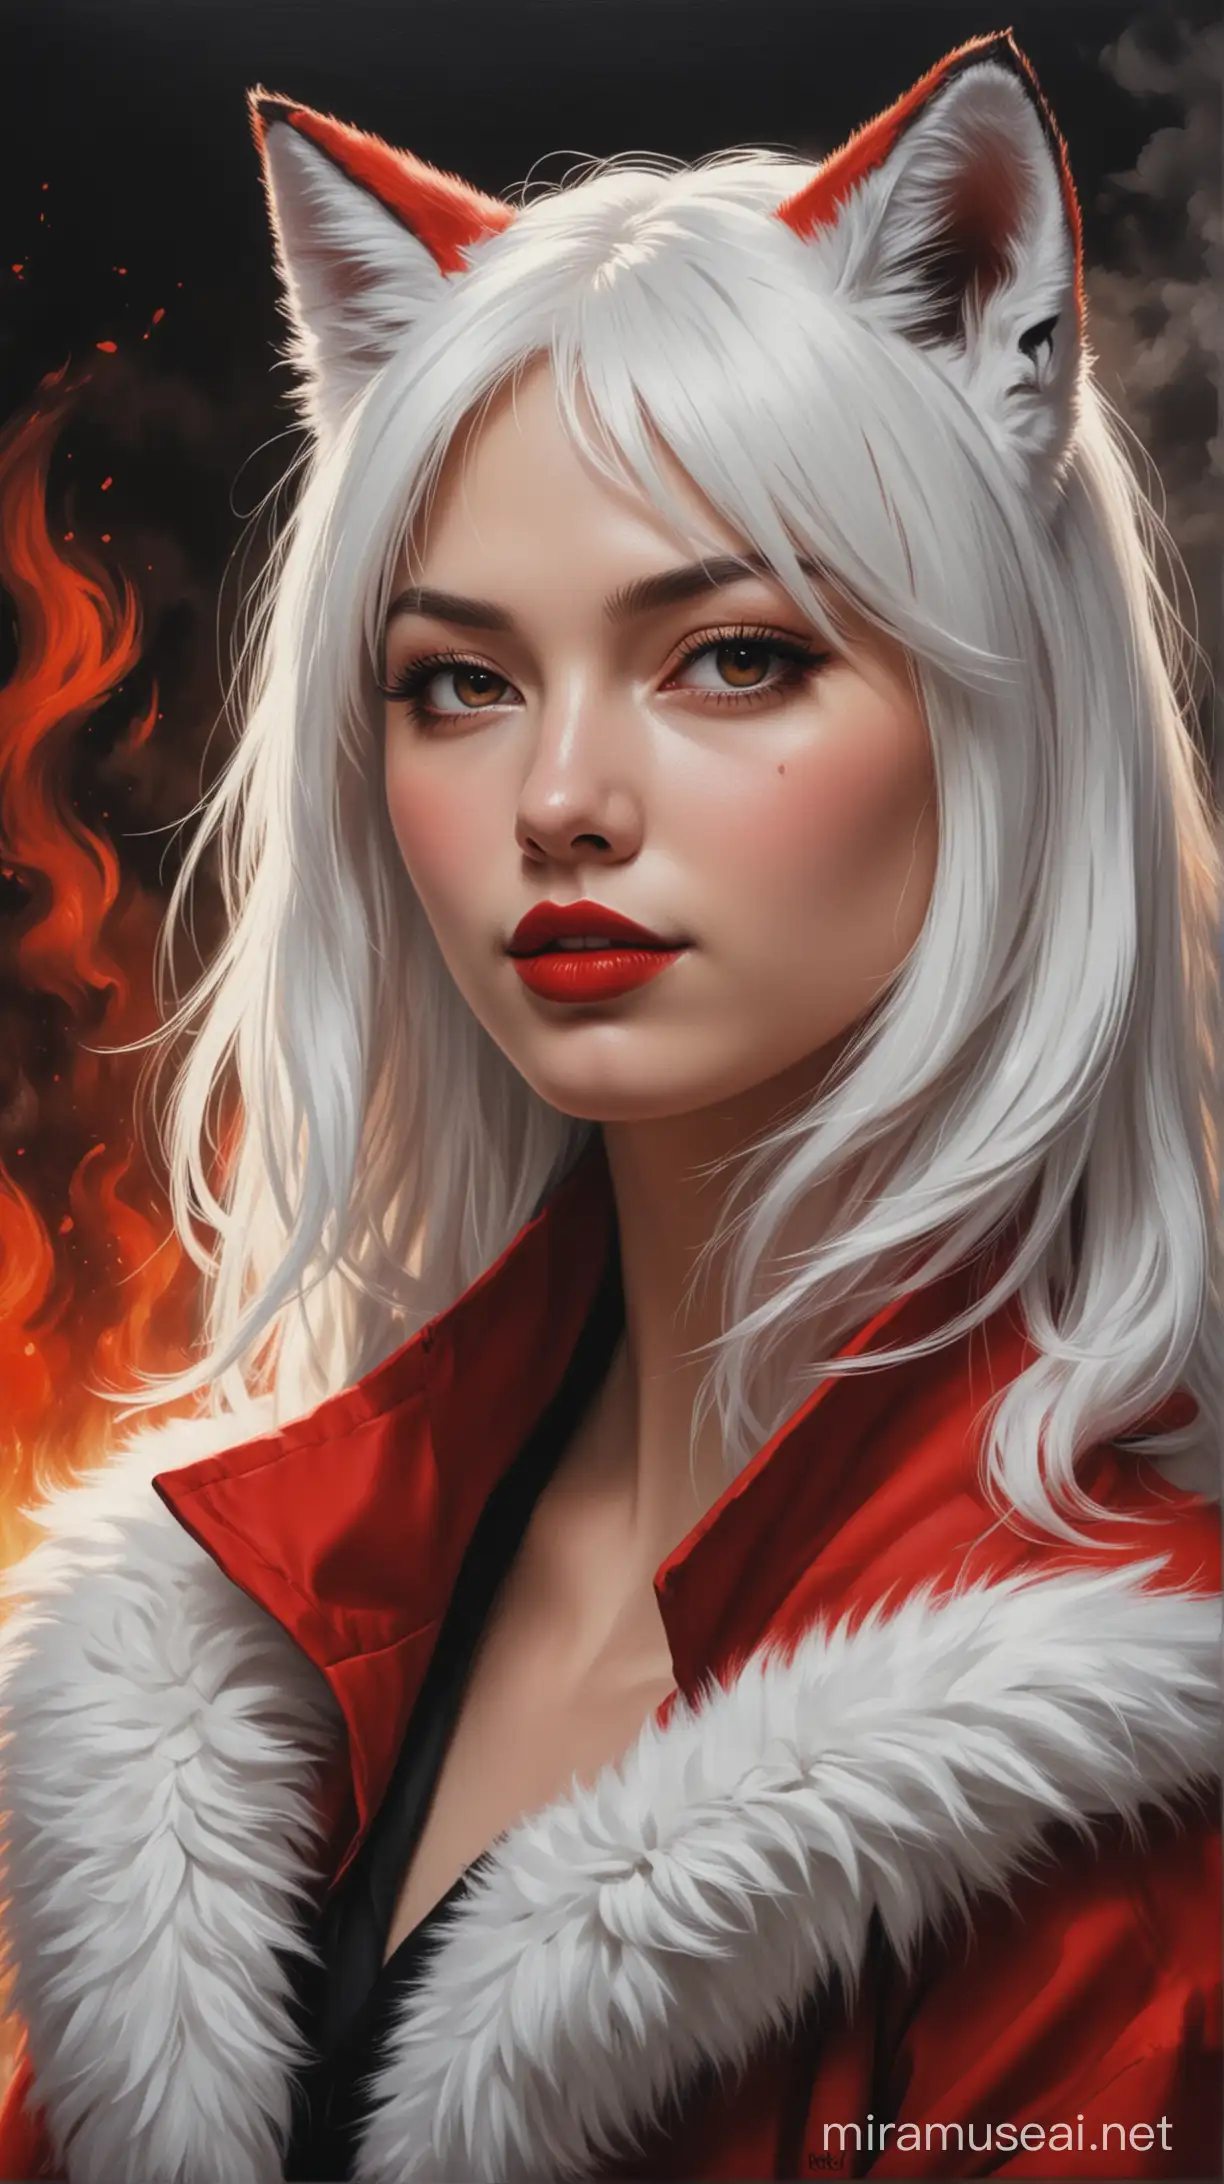 Oil element technic,realistic  painting of a woman with cat ears and red lipstick, staring into the distance. She has white hair and is wearing a red coat with black accents. The background is a mix of red, black, and white, with a white fox at the top left corner and a fire-like element at the bottom right corner- Niji SE 